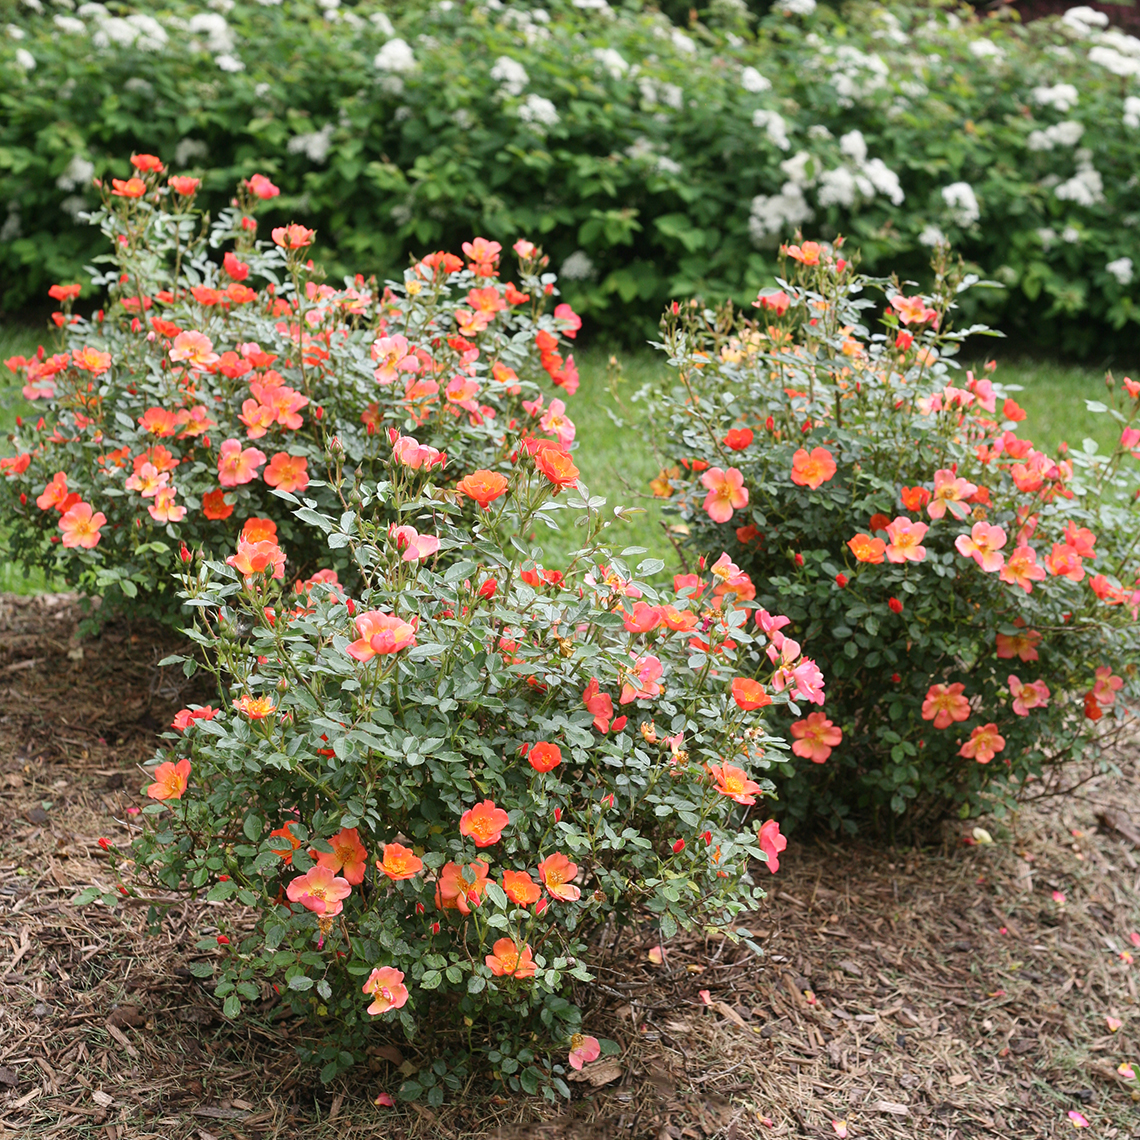 Three Oso Easy Hot Paprika Roses blooming in garden bed